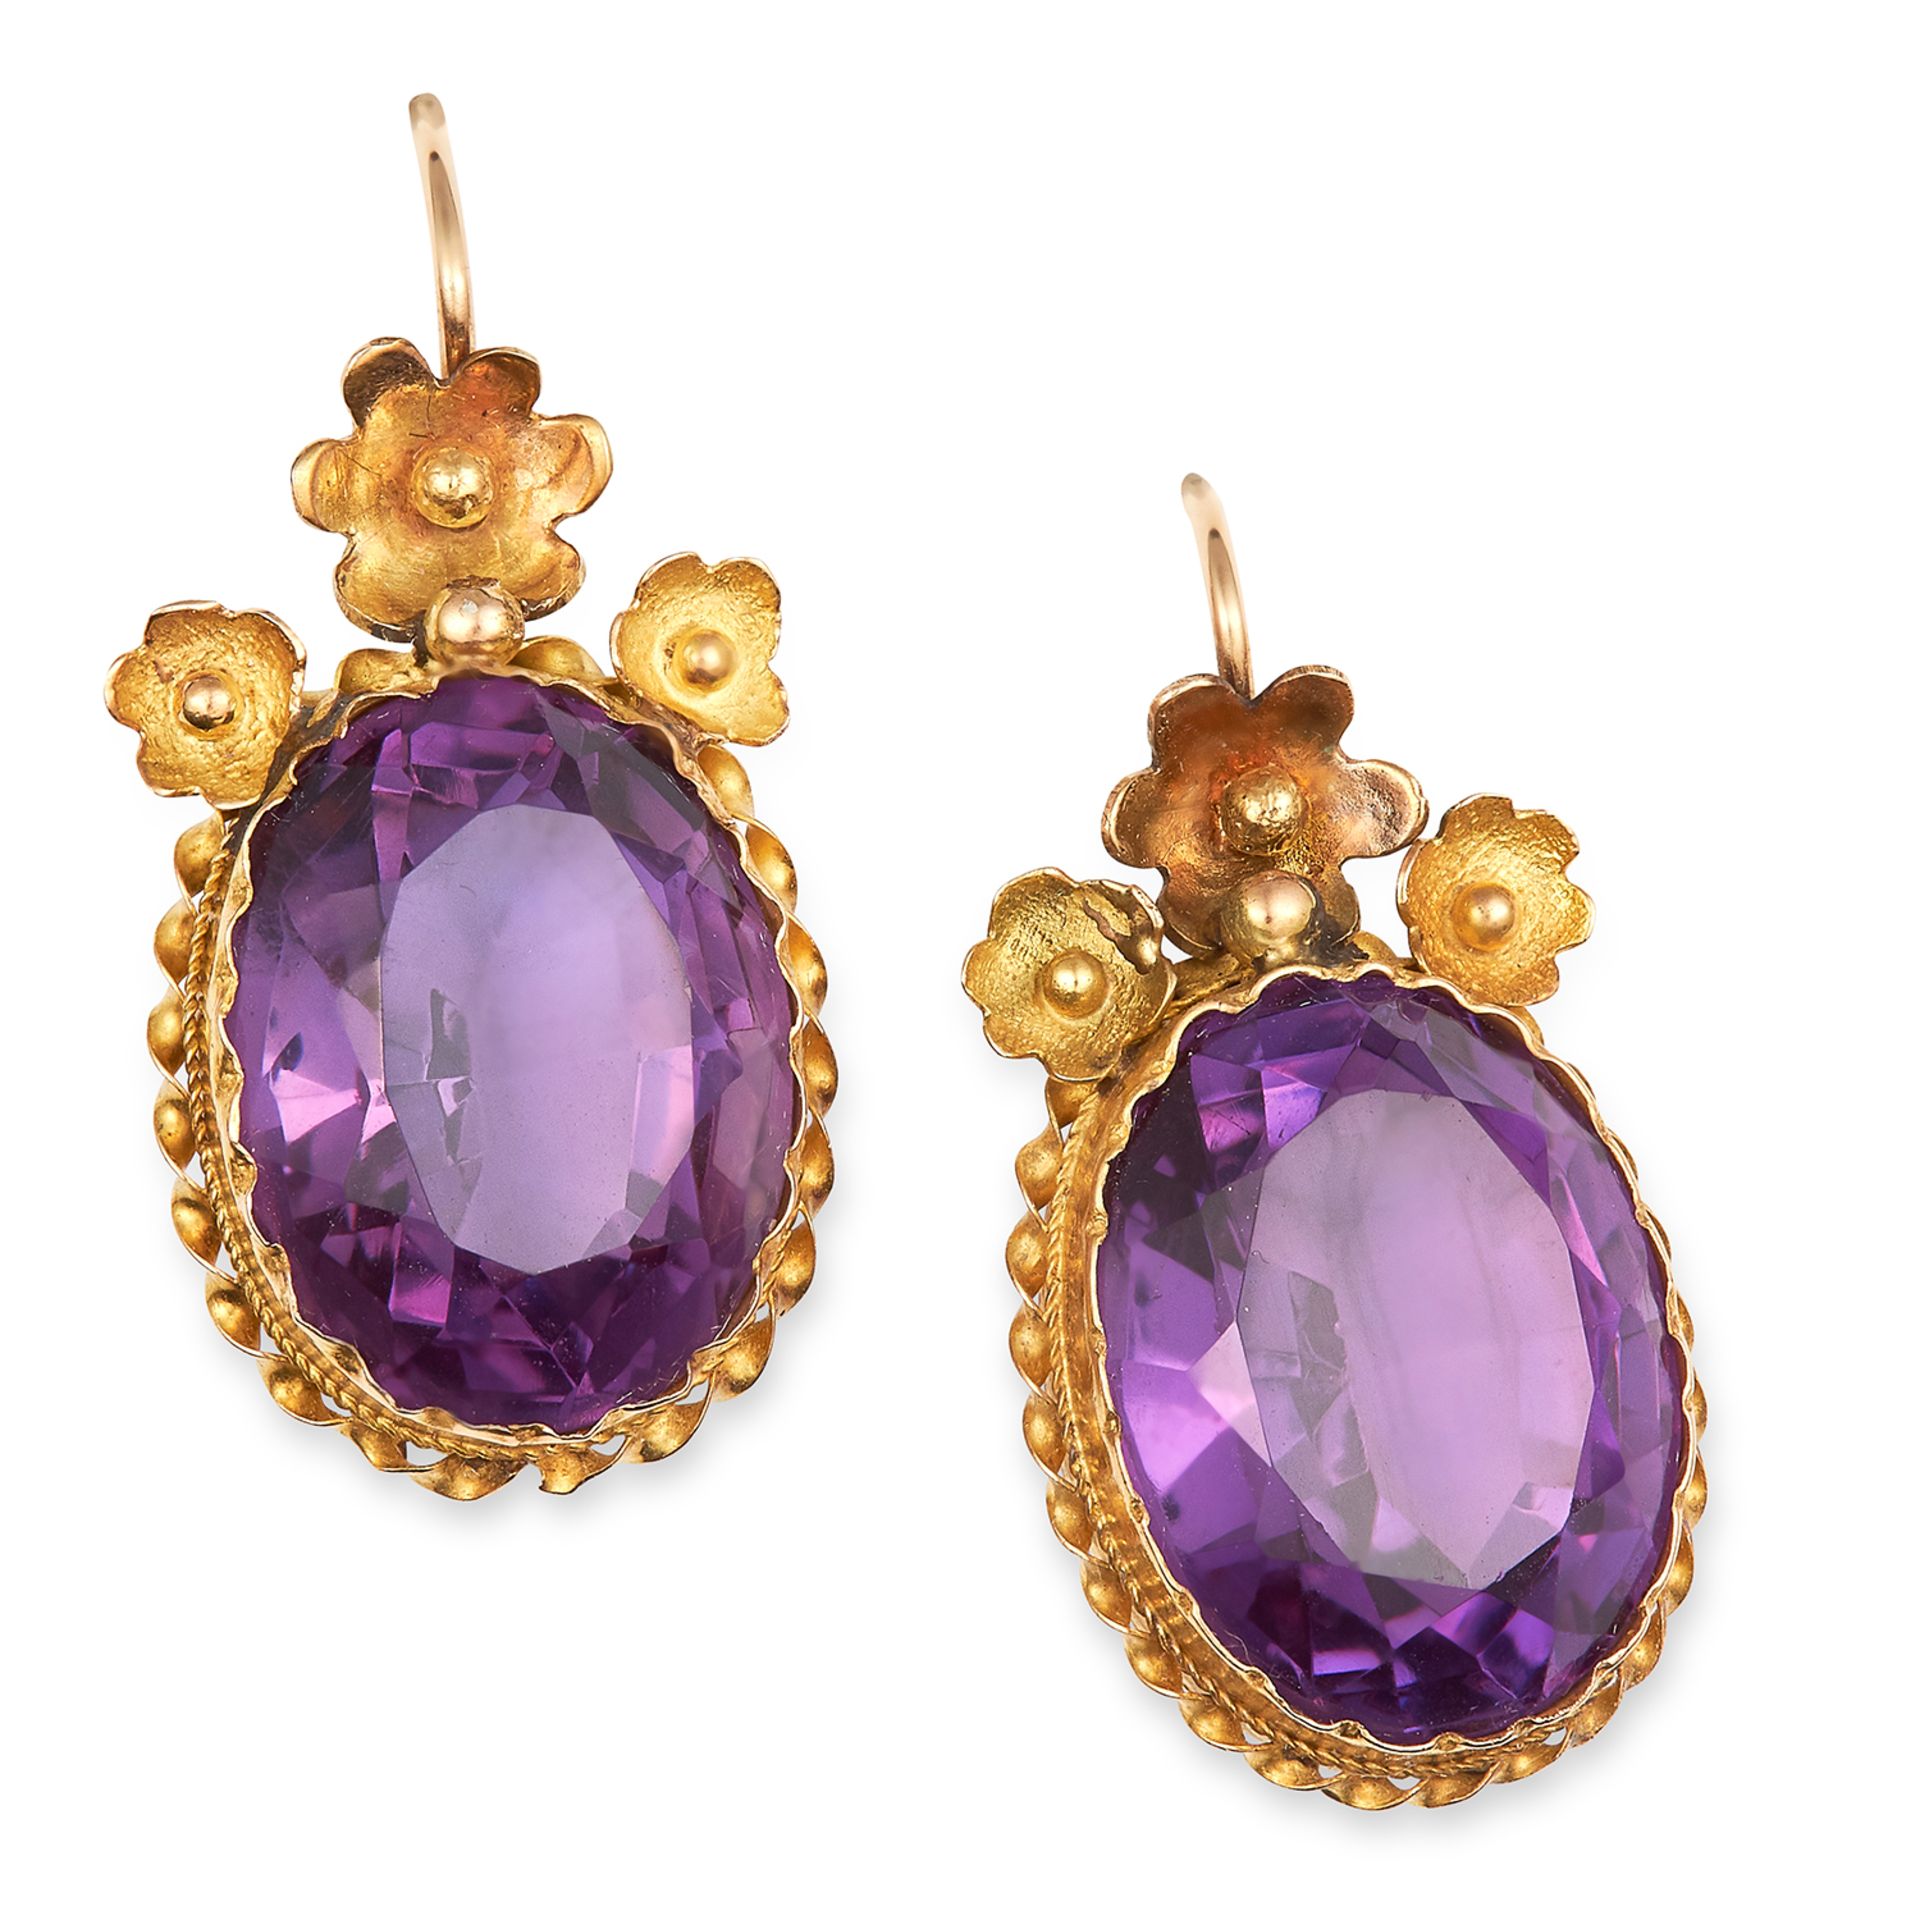 ANTIQUE AMETHYST EARRING AND NECKLACE SUITE the suite set with oval cut amethysts in a gold - Bild 2 aus 2